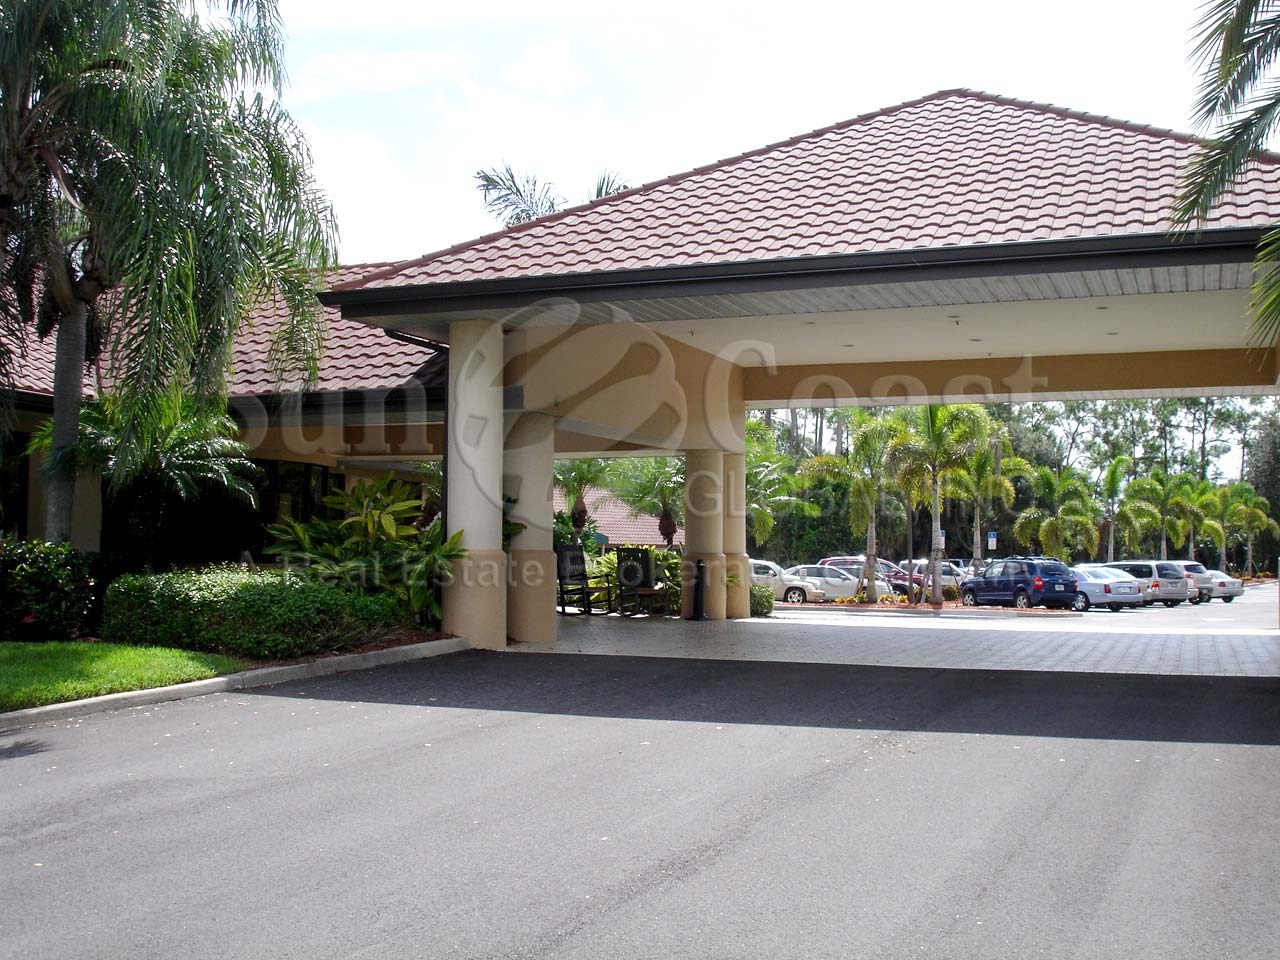 ROYAL WOOD Golf and Country Club entrance